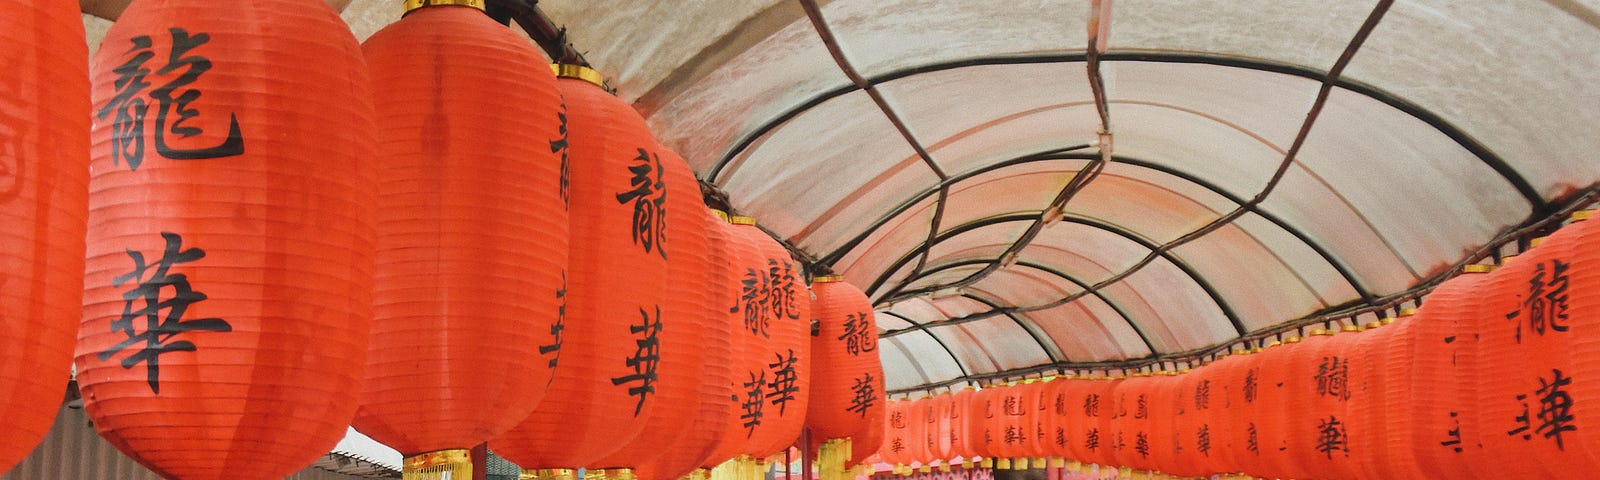 Traditional Chinese lanterns hung along a pathway — symbolism of tradition as the backbone to culture or a chokehold on progress